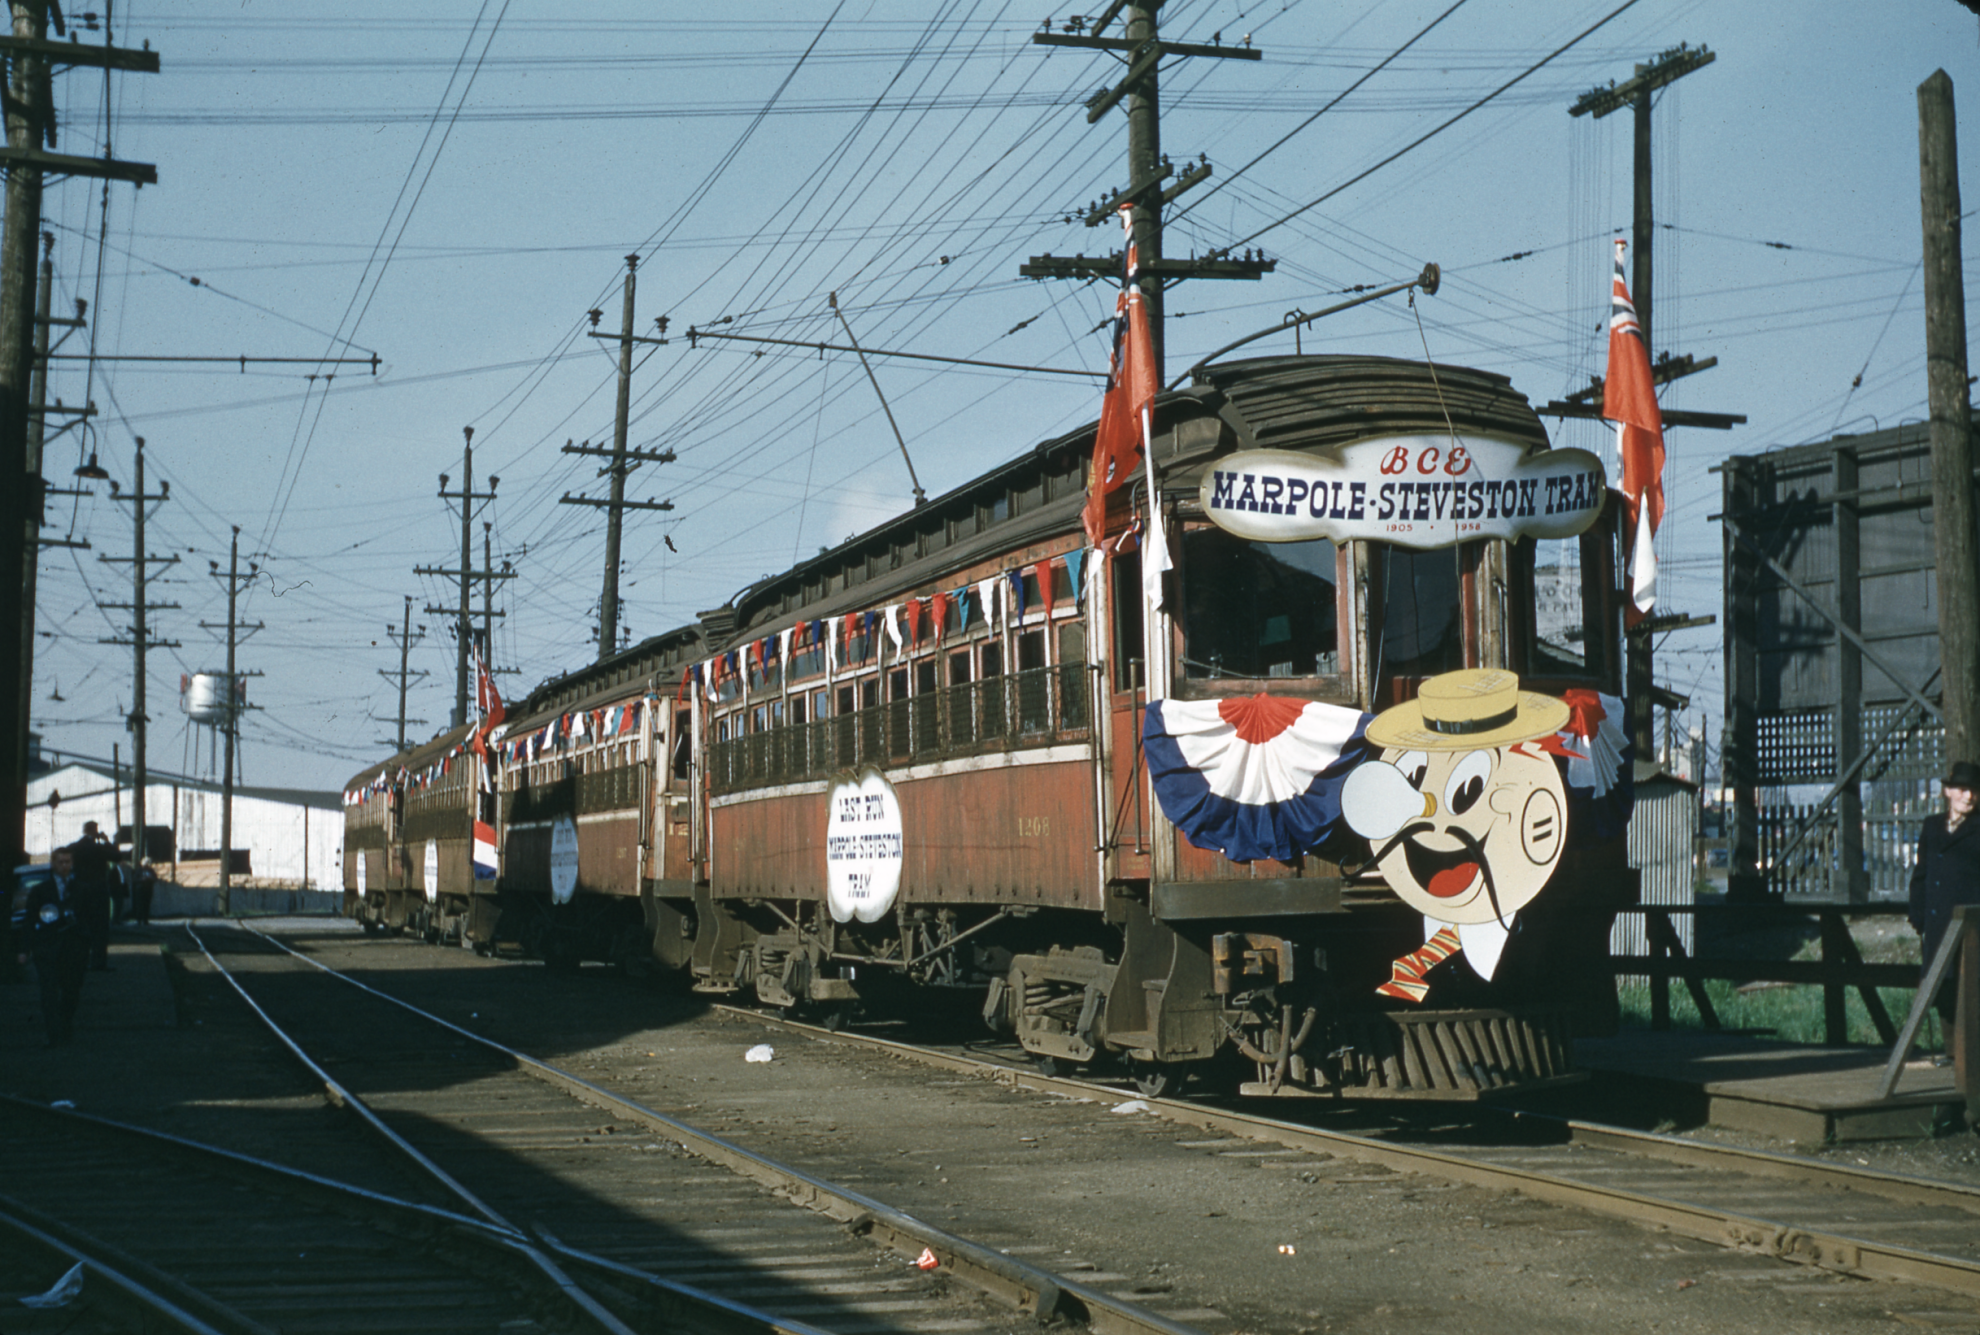 Historic tram decorated with red, blue and white flags and a cartoon illustration of Reddy Kilowatt.